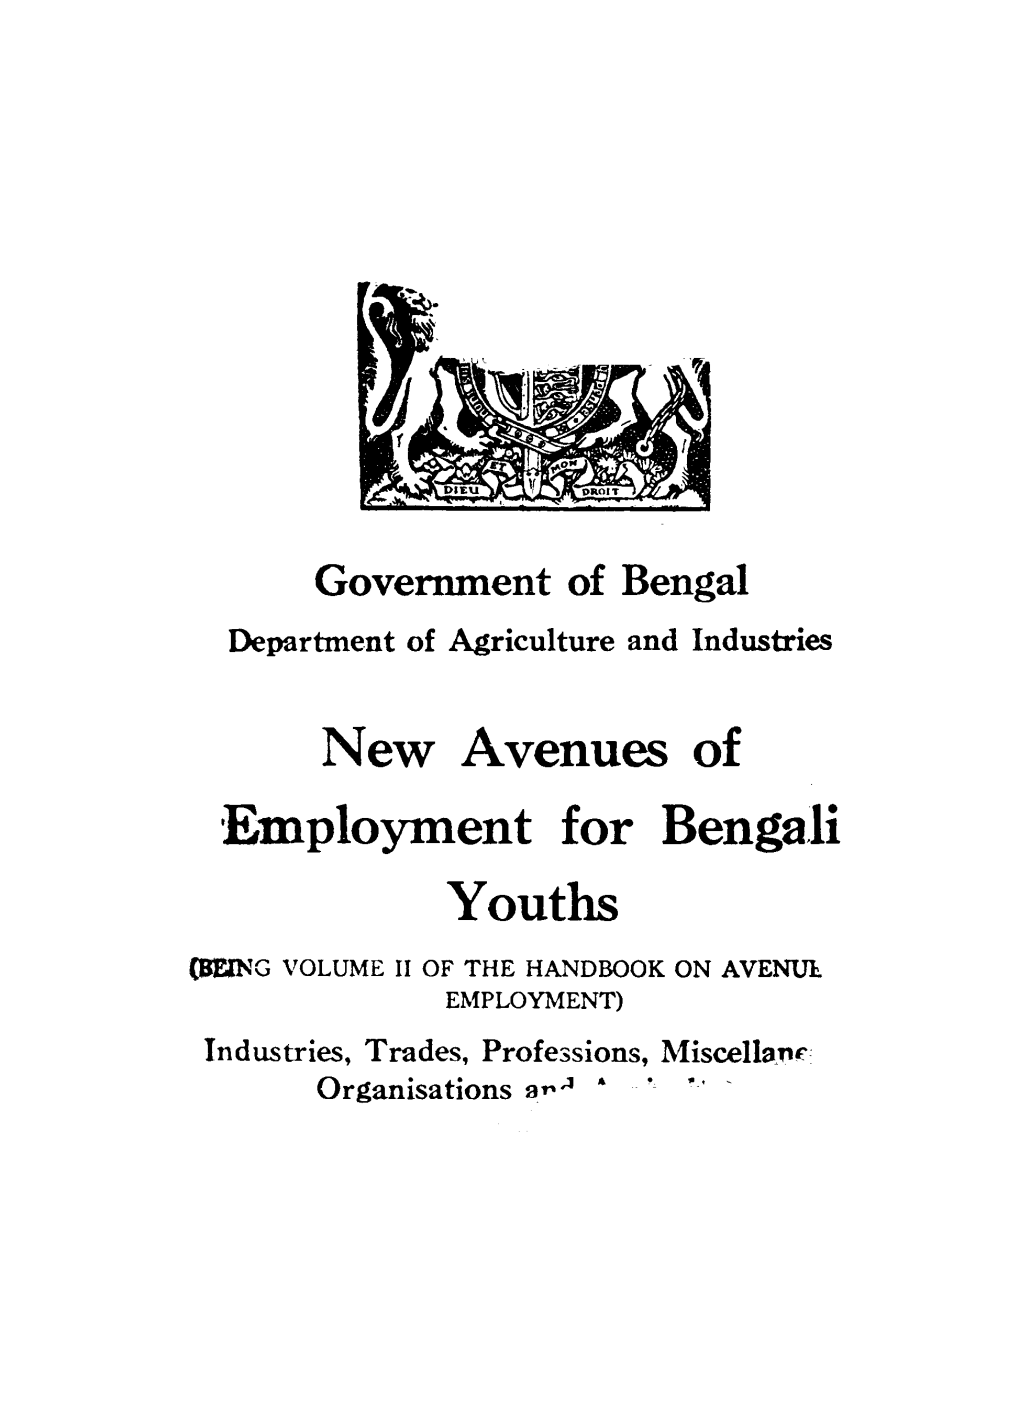 New Avenues of Employment for Bengali Youths